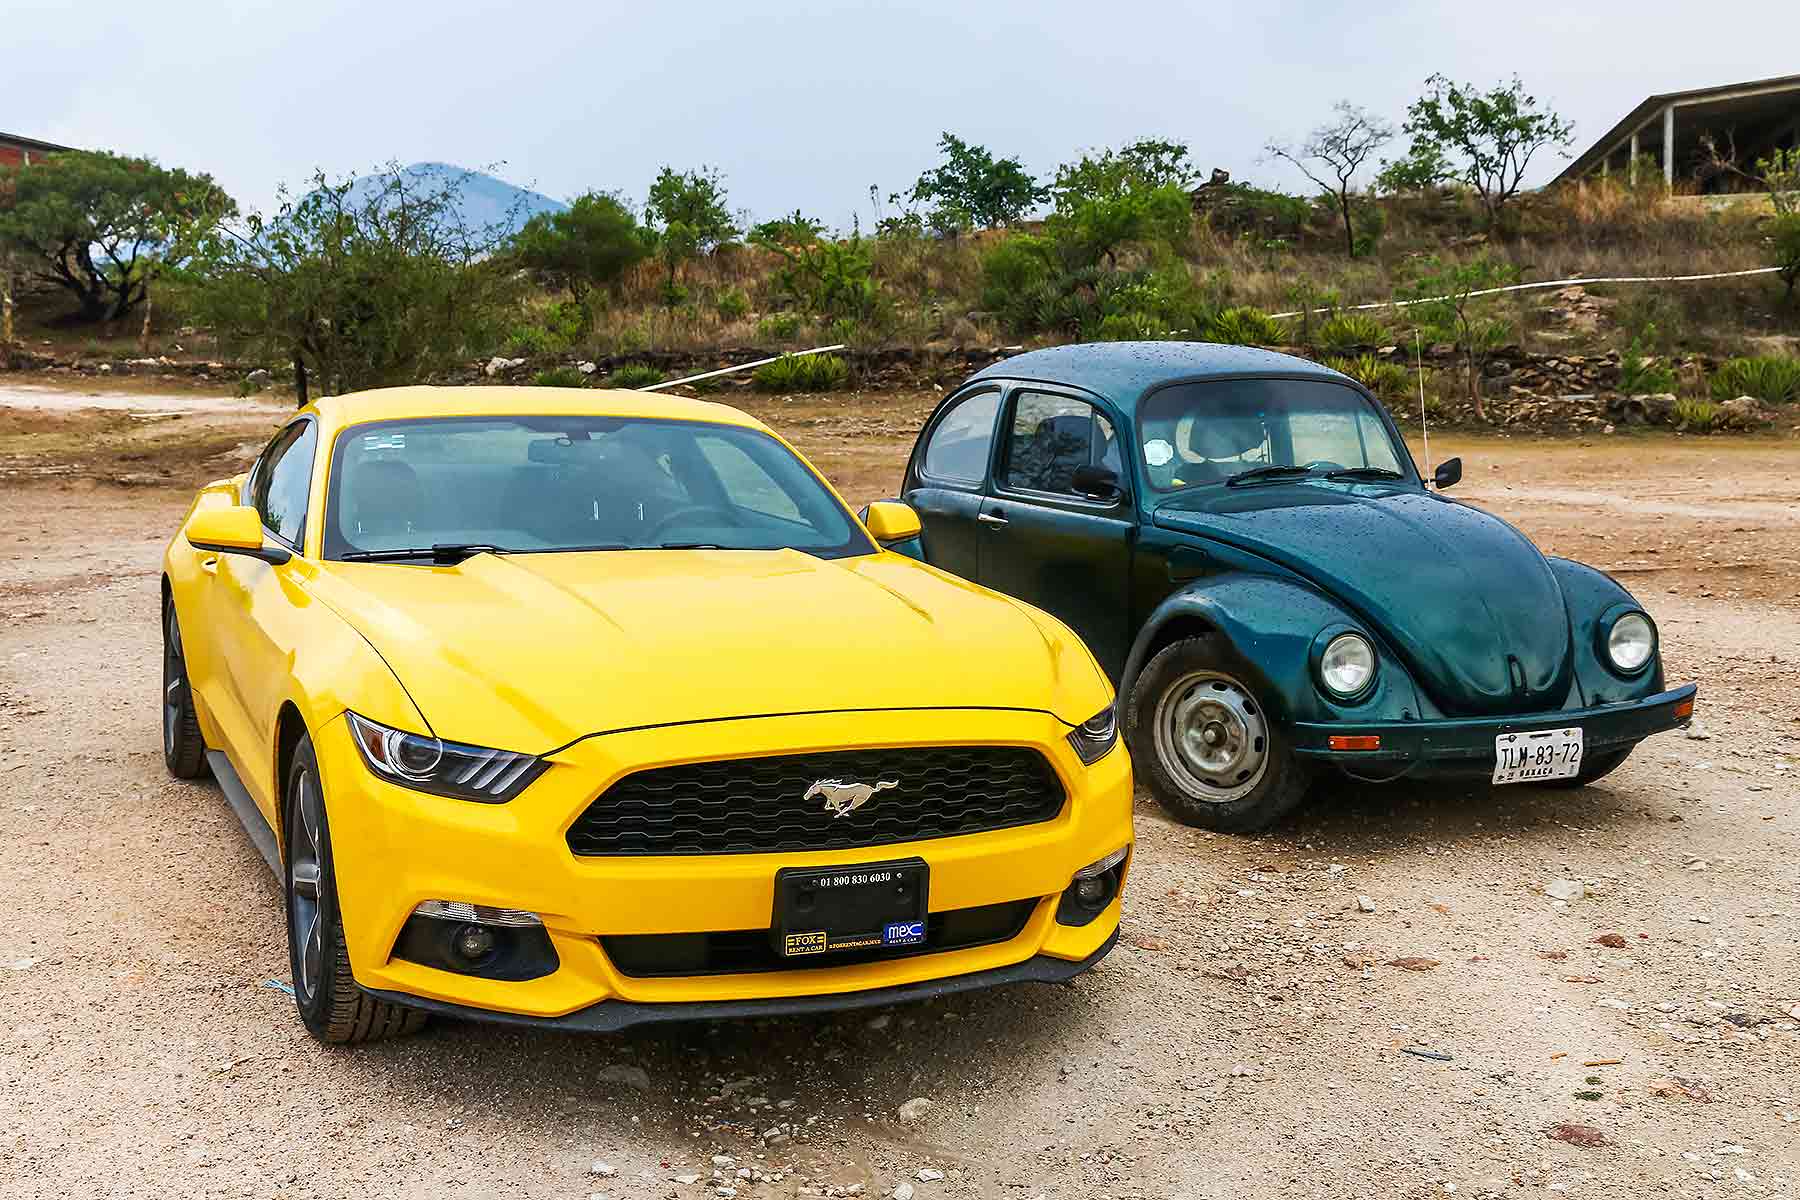 Ford and Volkswagen icons